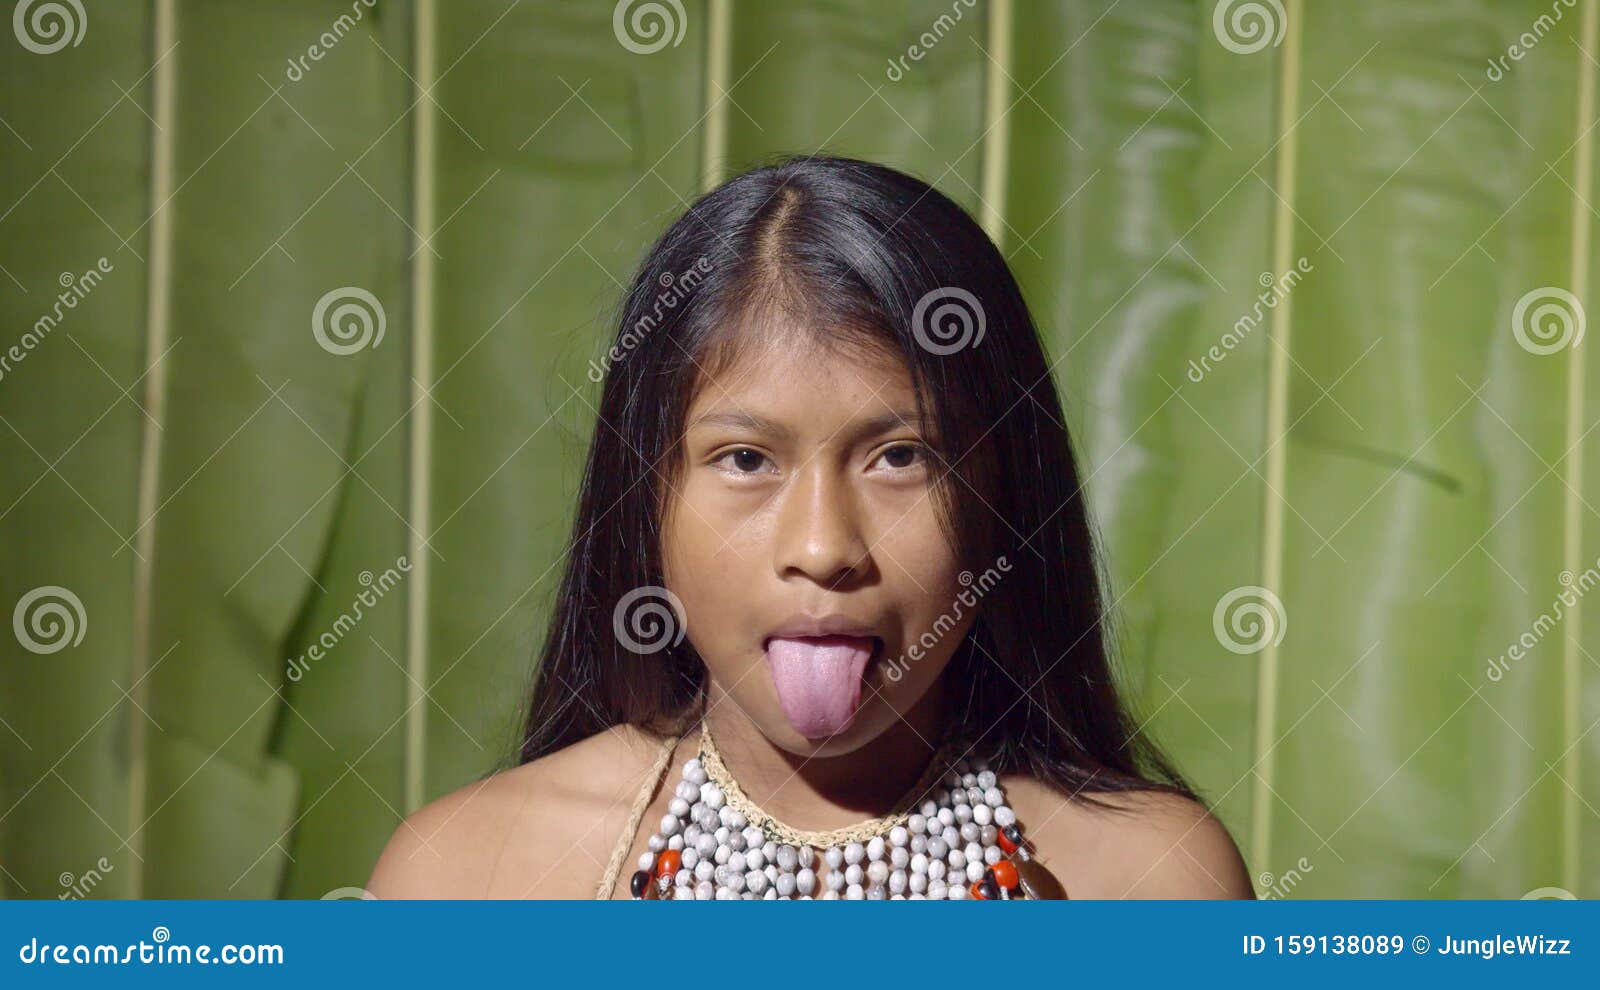 girls sticking tongue out